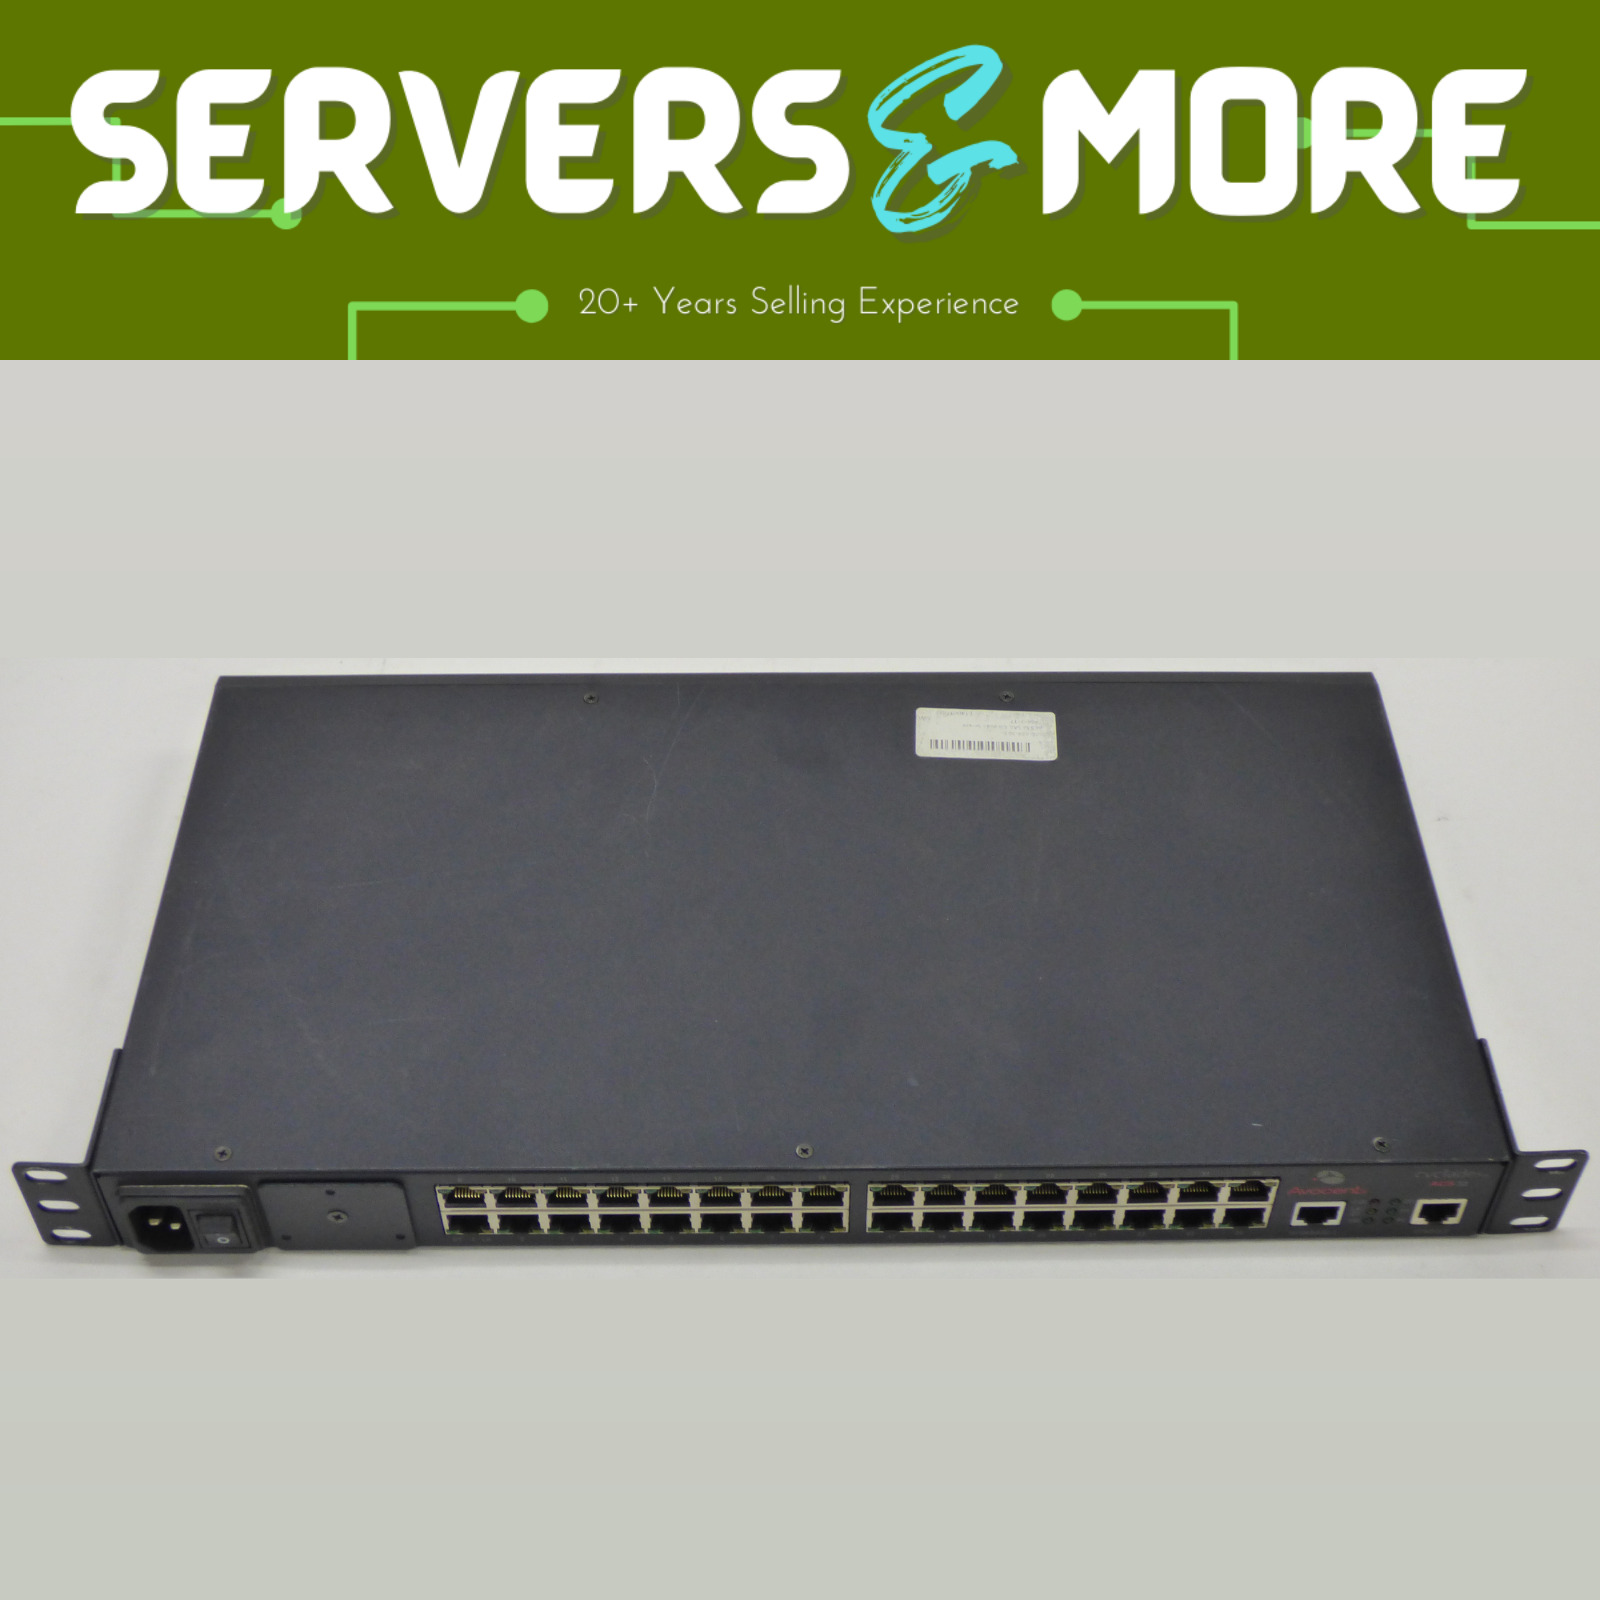 Avocent Cyclades AlterPath ACS32 (520-494-503) Console Server 32-Port with Ears